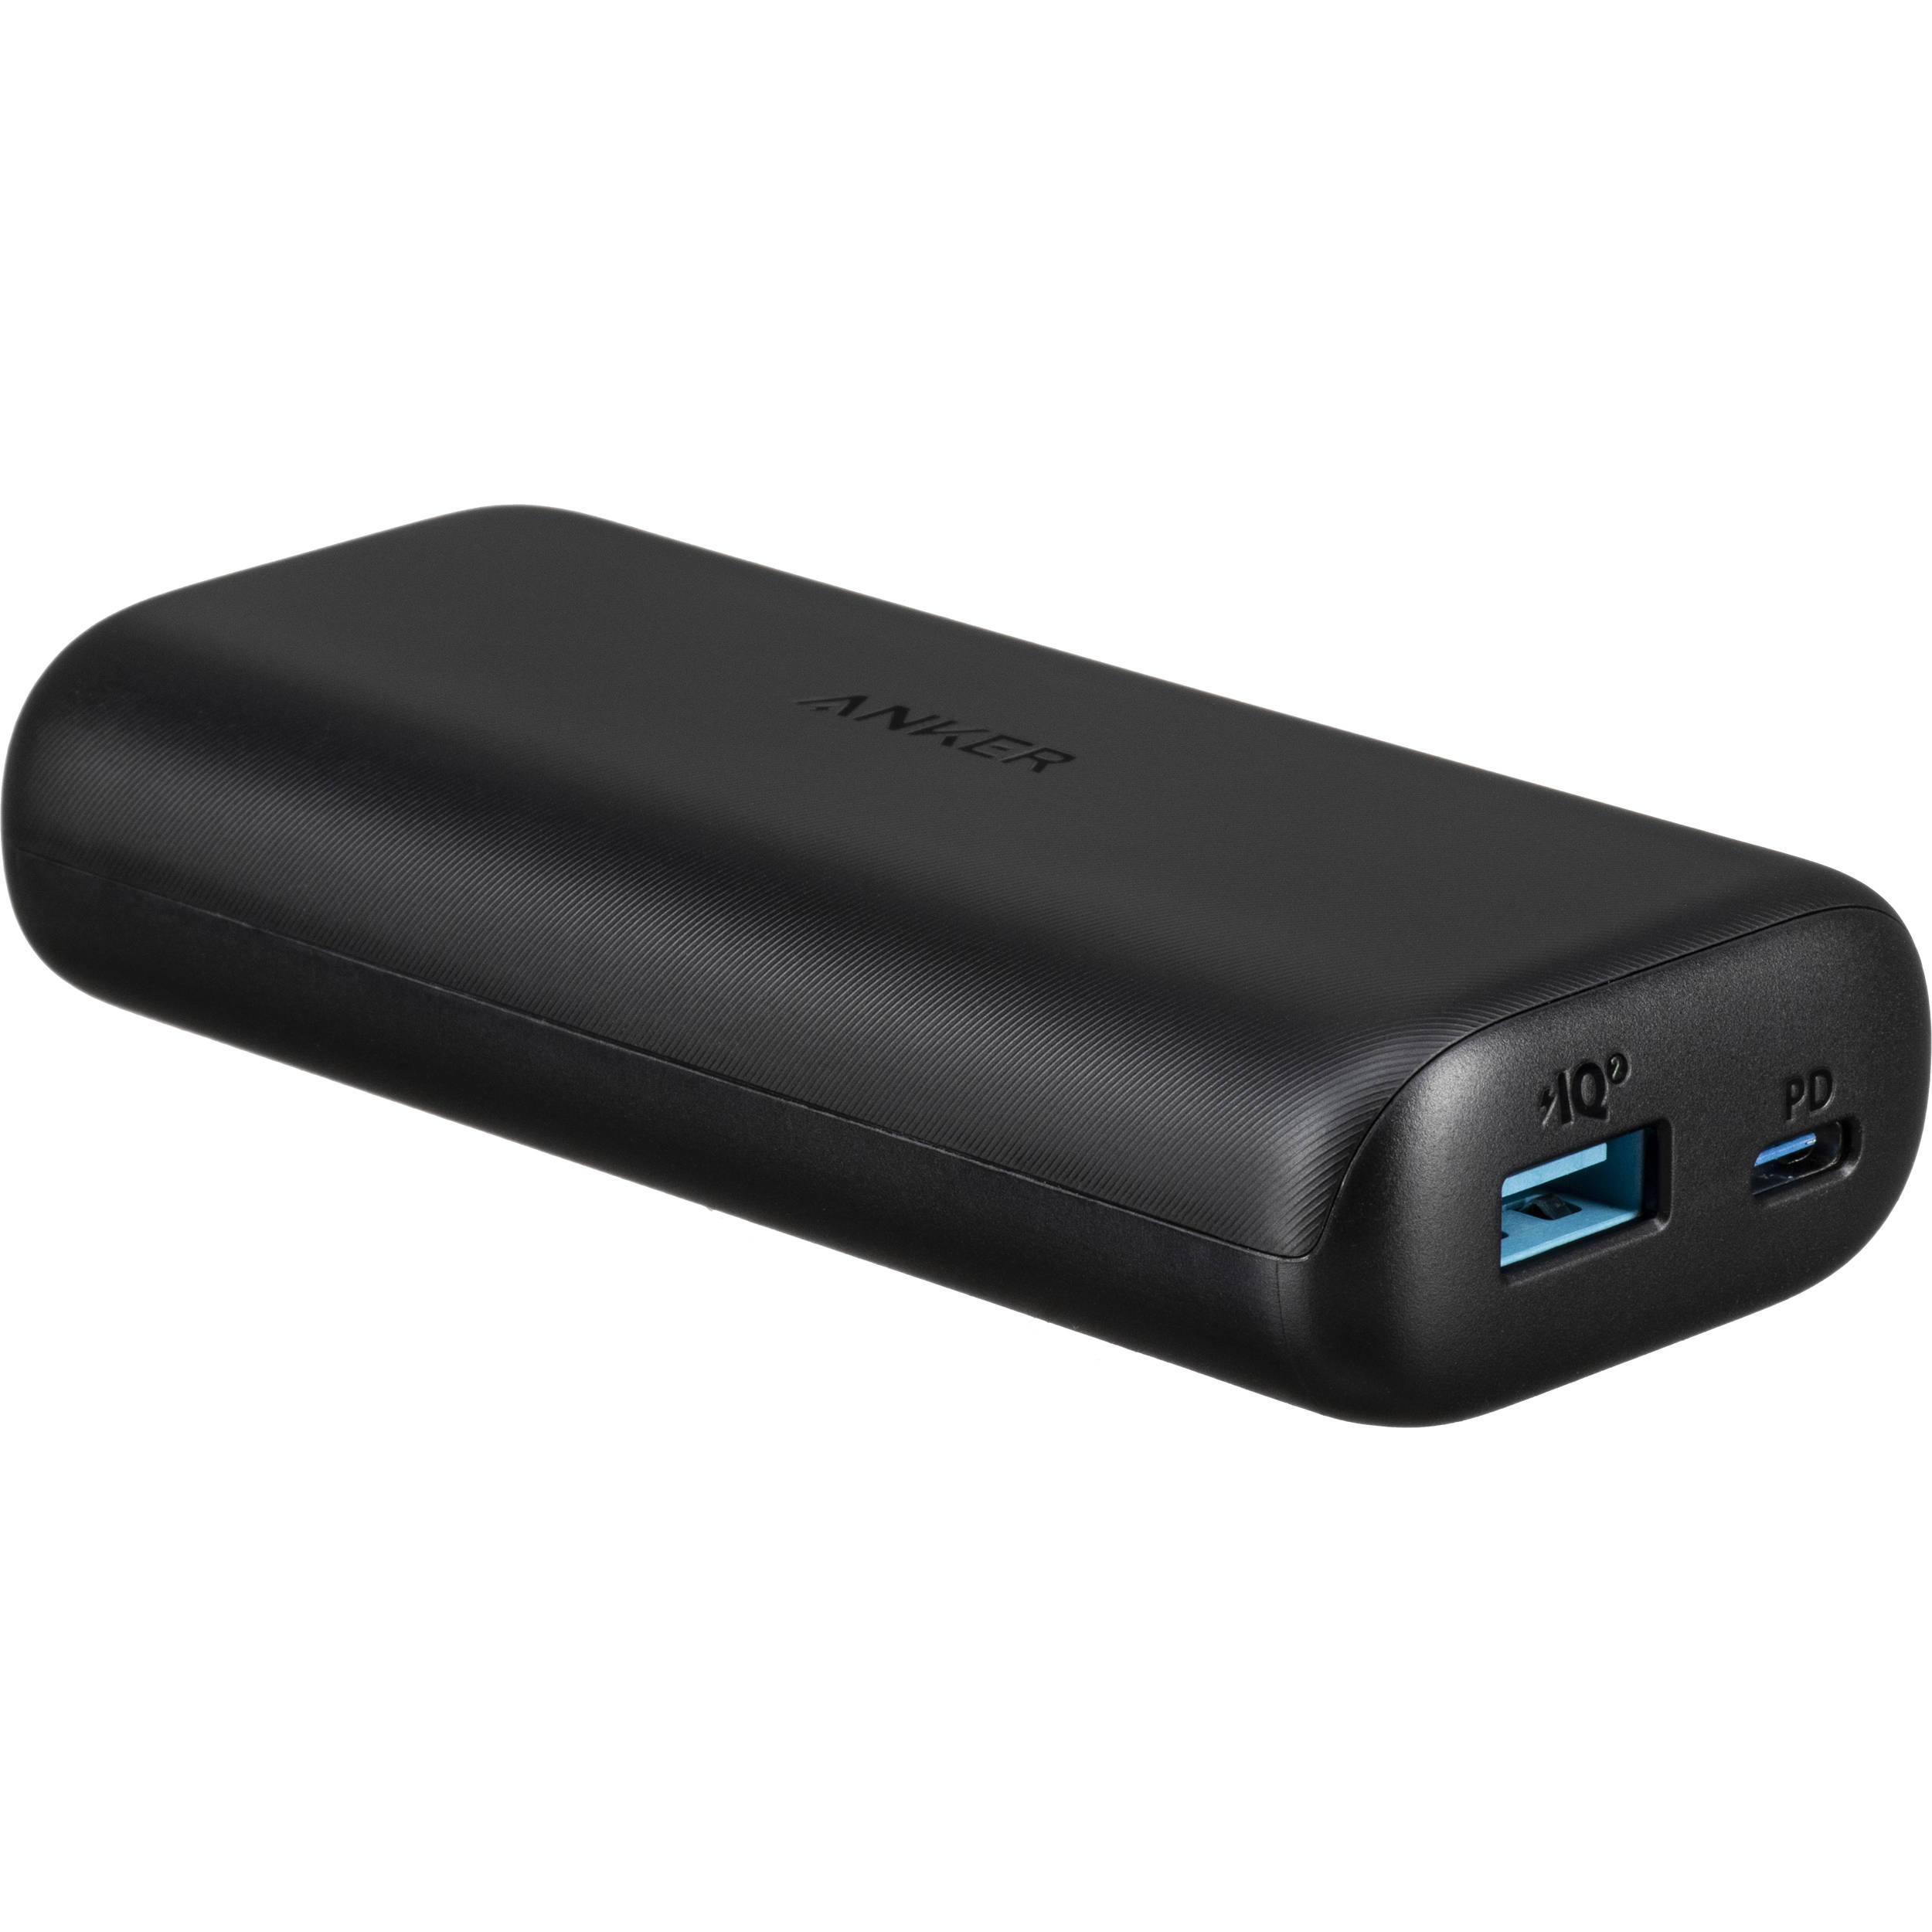 ANKER 10,000mAh PowerCore 10000 PD+ Portable Charger A1236HZ1